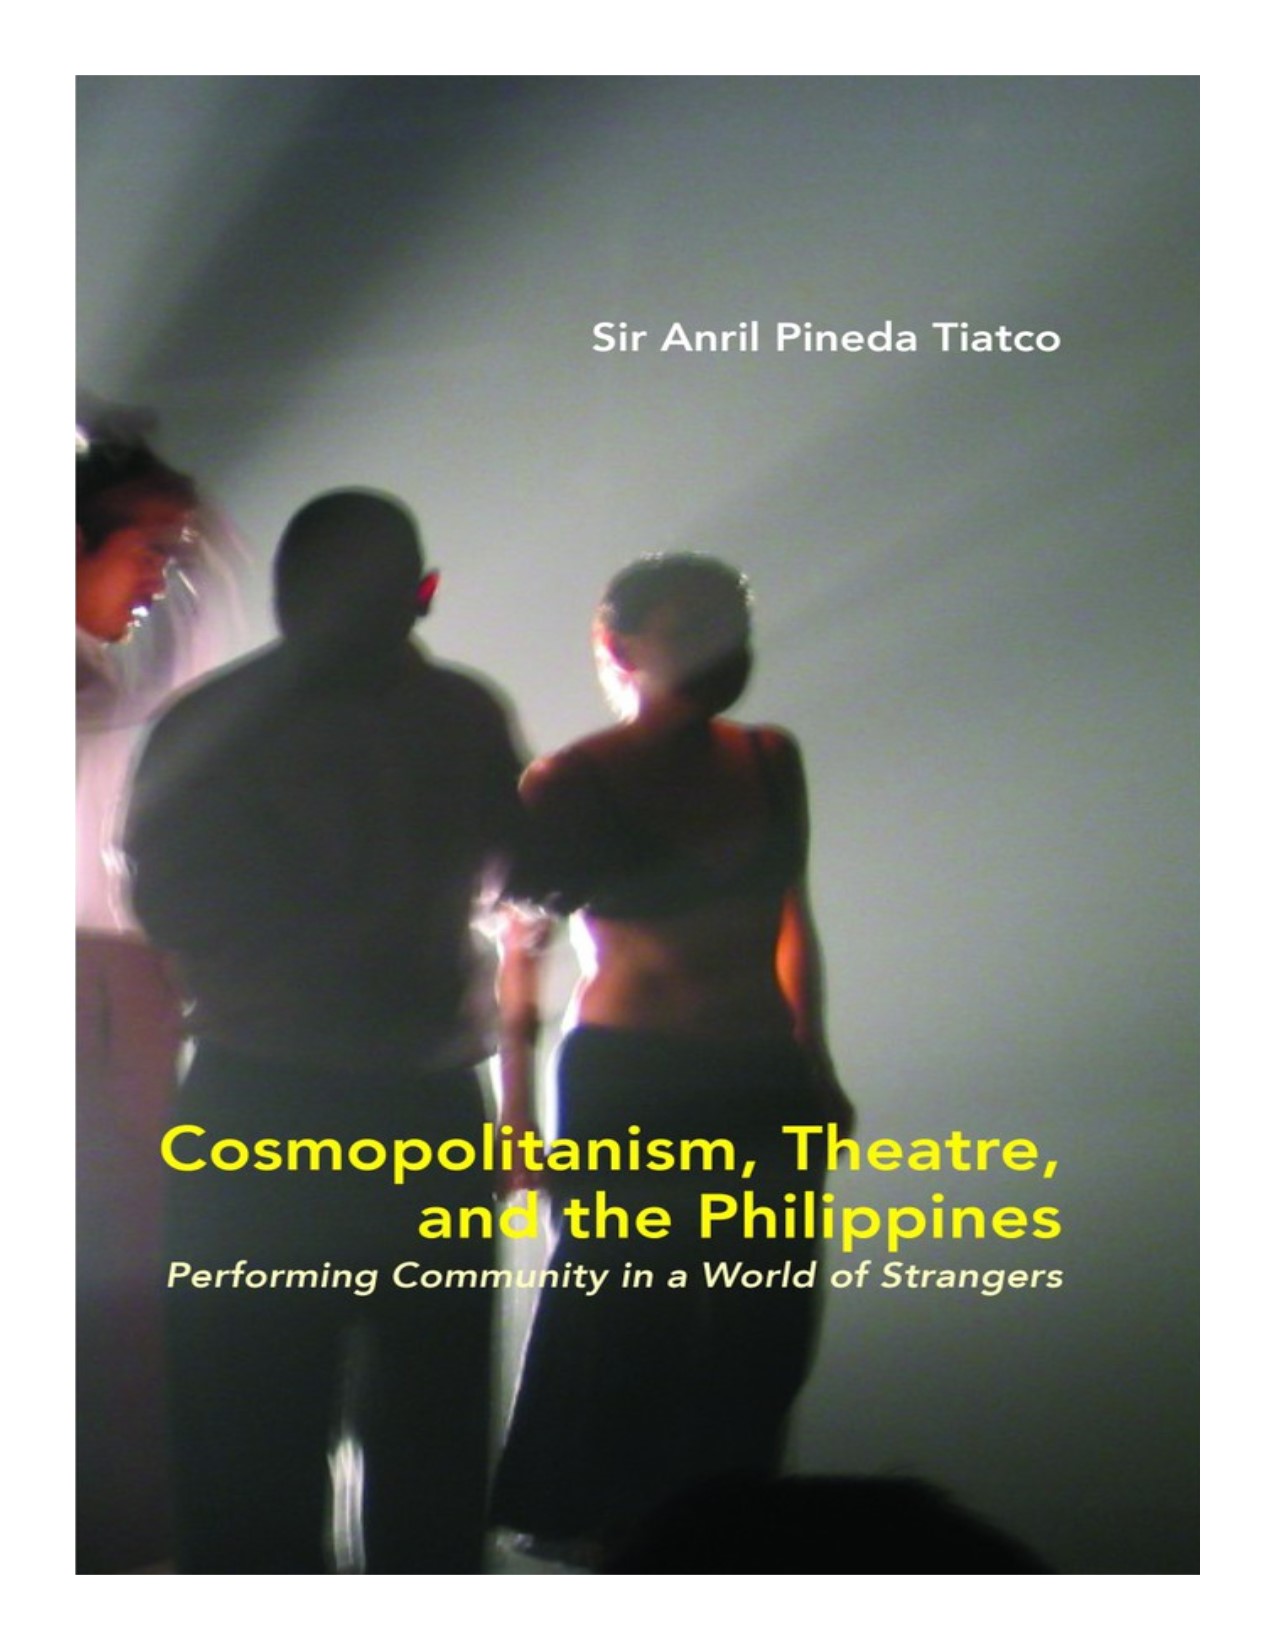 Cosmopolitanism, theatre, and the Philippines performing community in a world of strangers